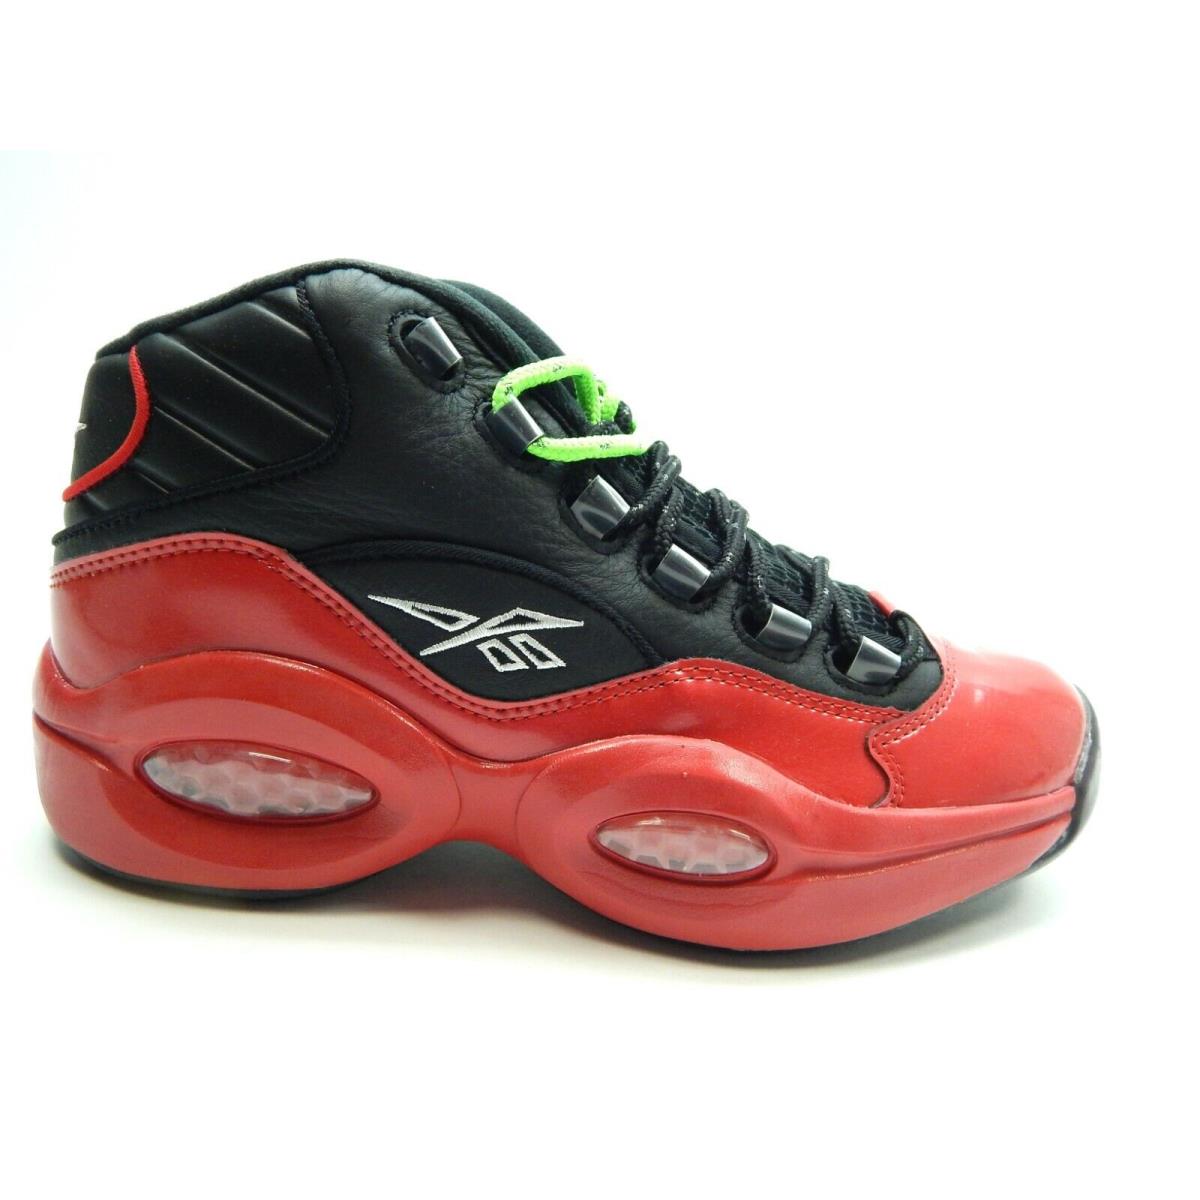 Reebok Question Mid Basketball Black Red Men Shoes G57551